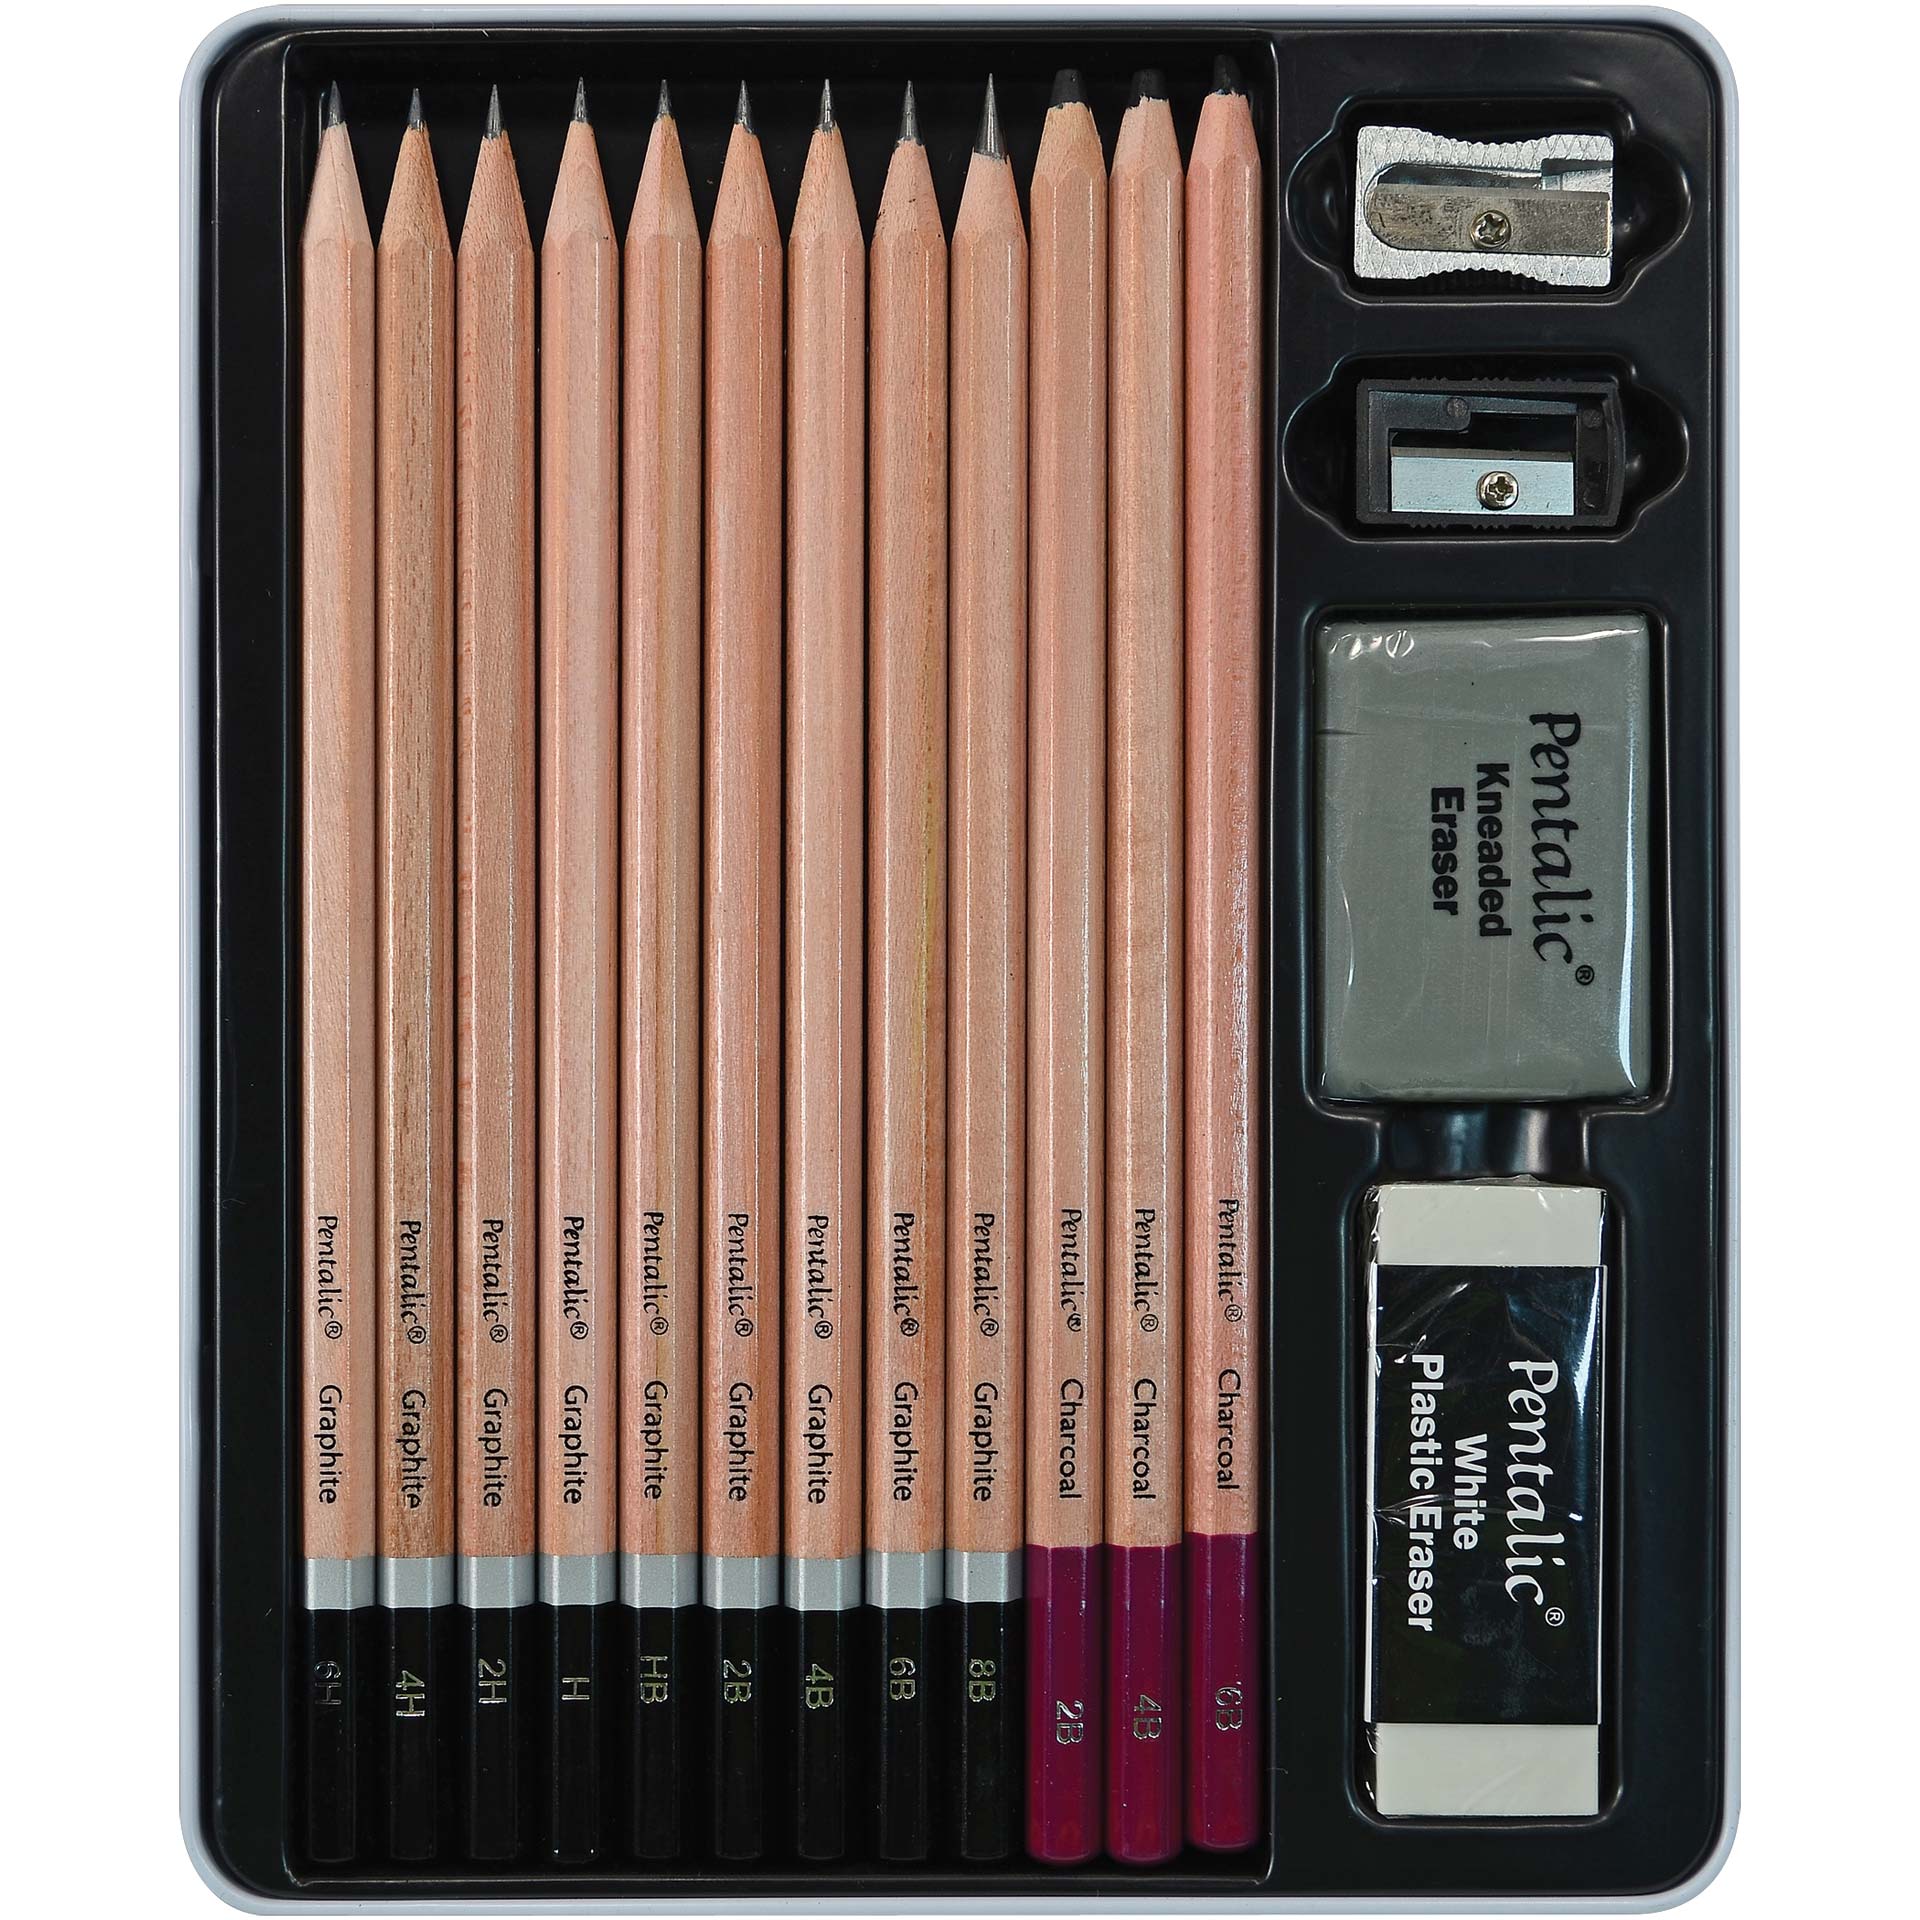 Wholesale Hand Painted Woodless Dark Pencil For Writing Set Graphite And  Charcoal Soft Pens For Sketching, Drawing, And Coloring Ideal For Artists  From Shenzhenwkf, $8.55